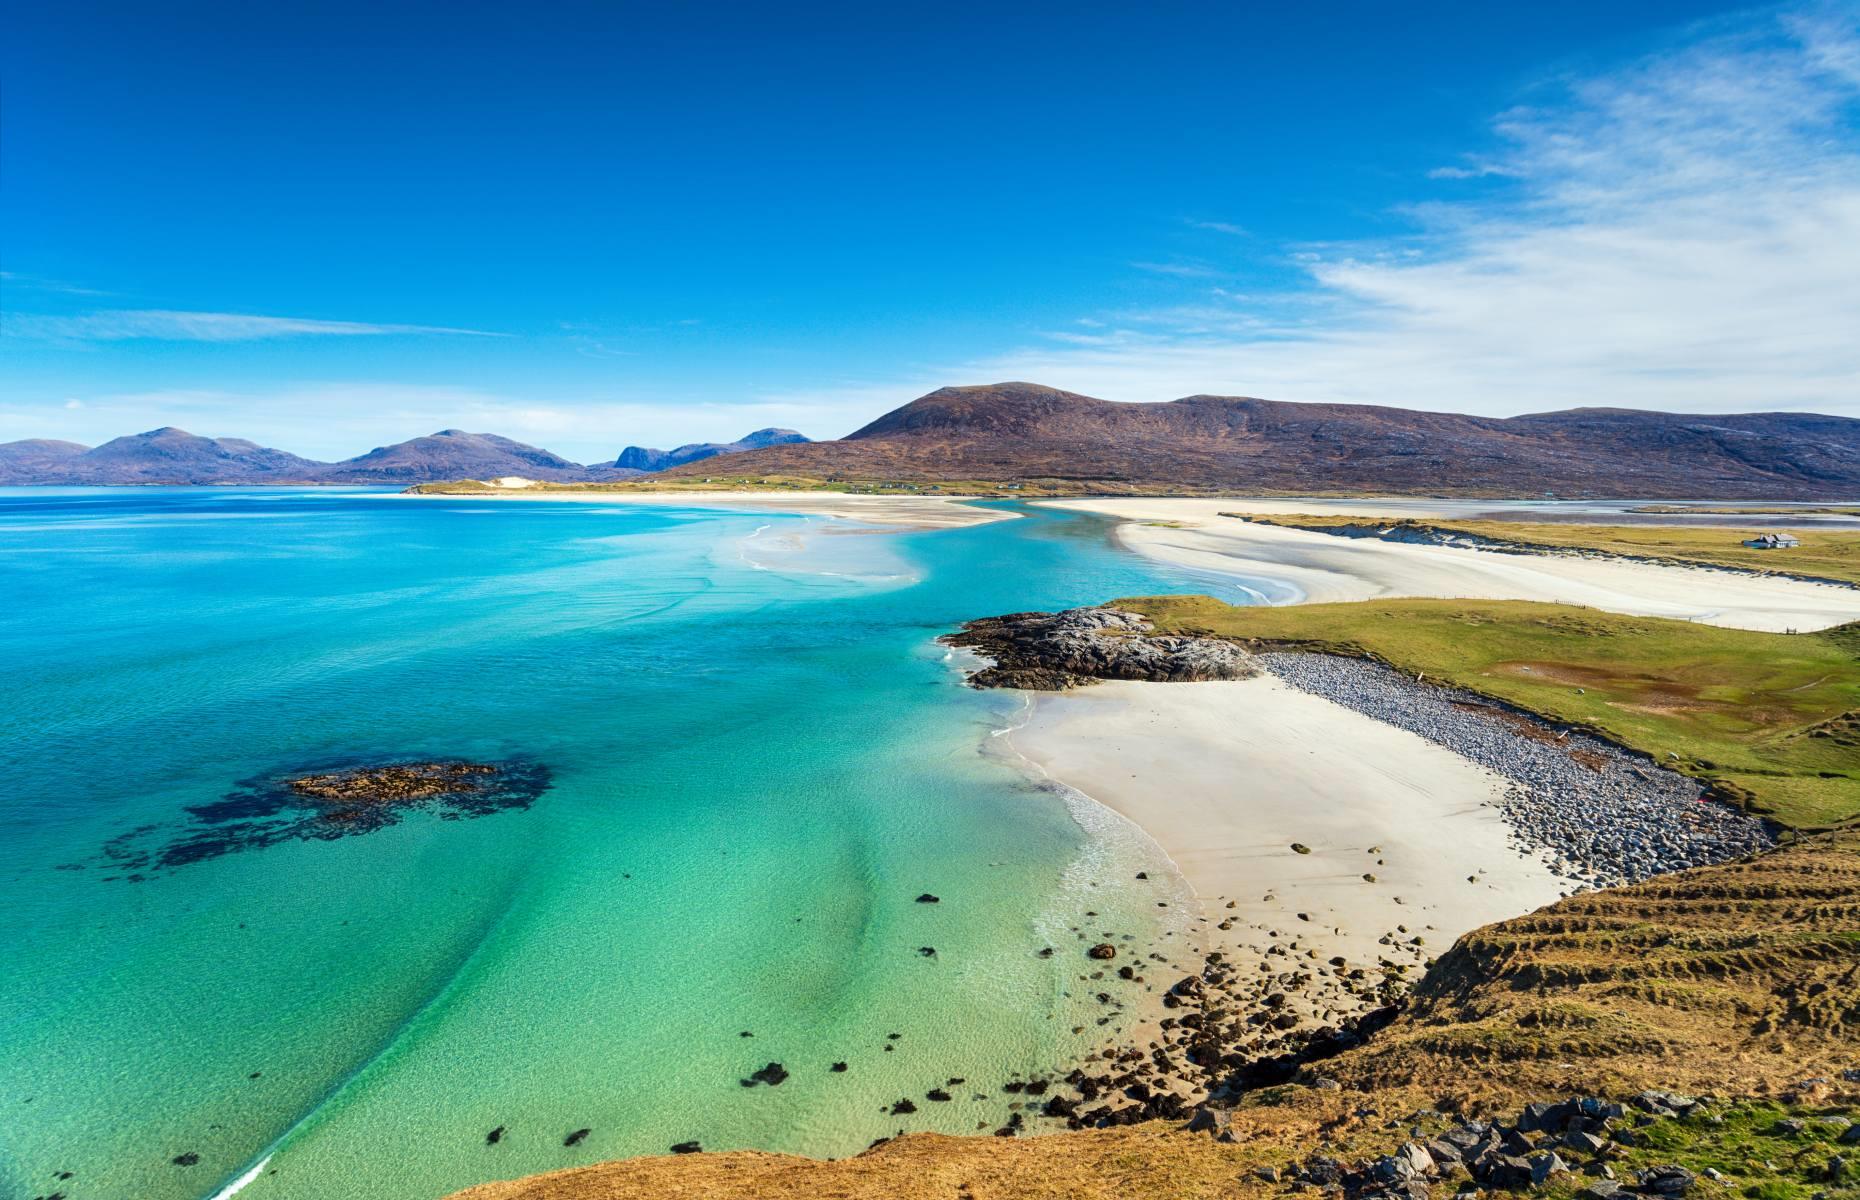 <p>While Europe’s most talked-about places are popular for a reason and shouldn’t necessarily be dropped from your itinerary, there is far more to this little continent than what you see on social media. For instance, Scotland isn’t all just moody castles and rugged highlands – it has Caribbean-like beaches, like the one pictured here on the Isle of Harris. You’ll be vastly rewarded for venturing beyond Croatia’s Dalmatian Coast and Iceland’s Golden Circle, and considering the countries you don’t see documented as much, such as Kosovo, Albania and Lithuania. </p>